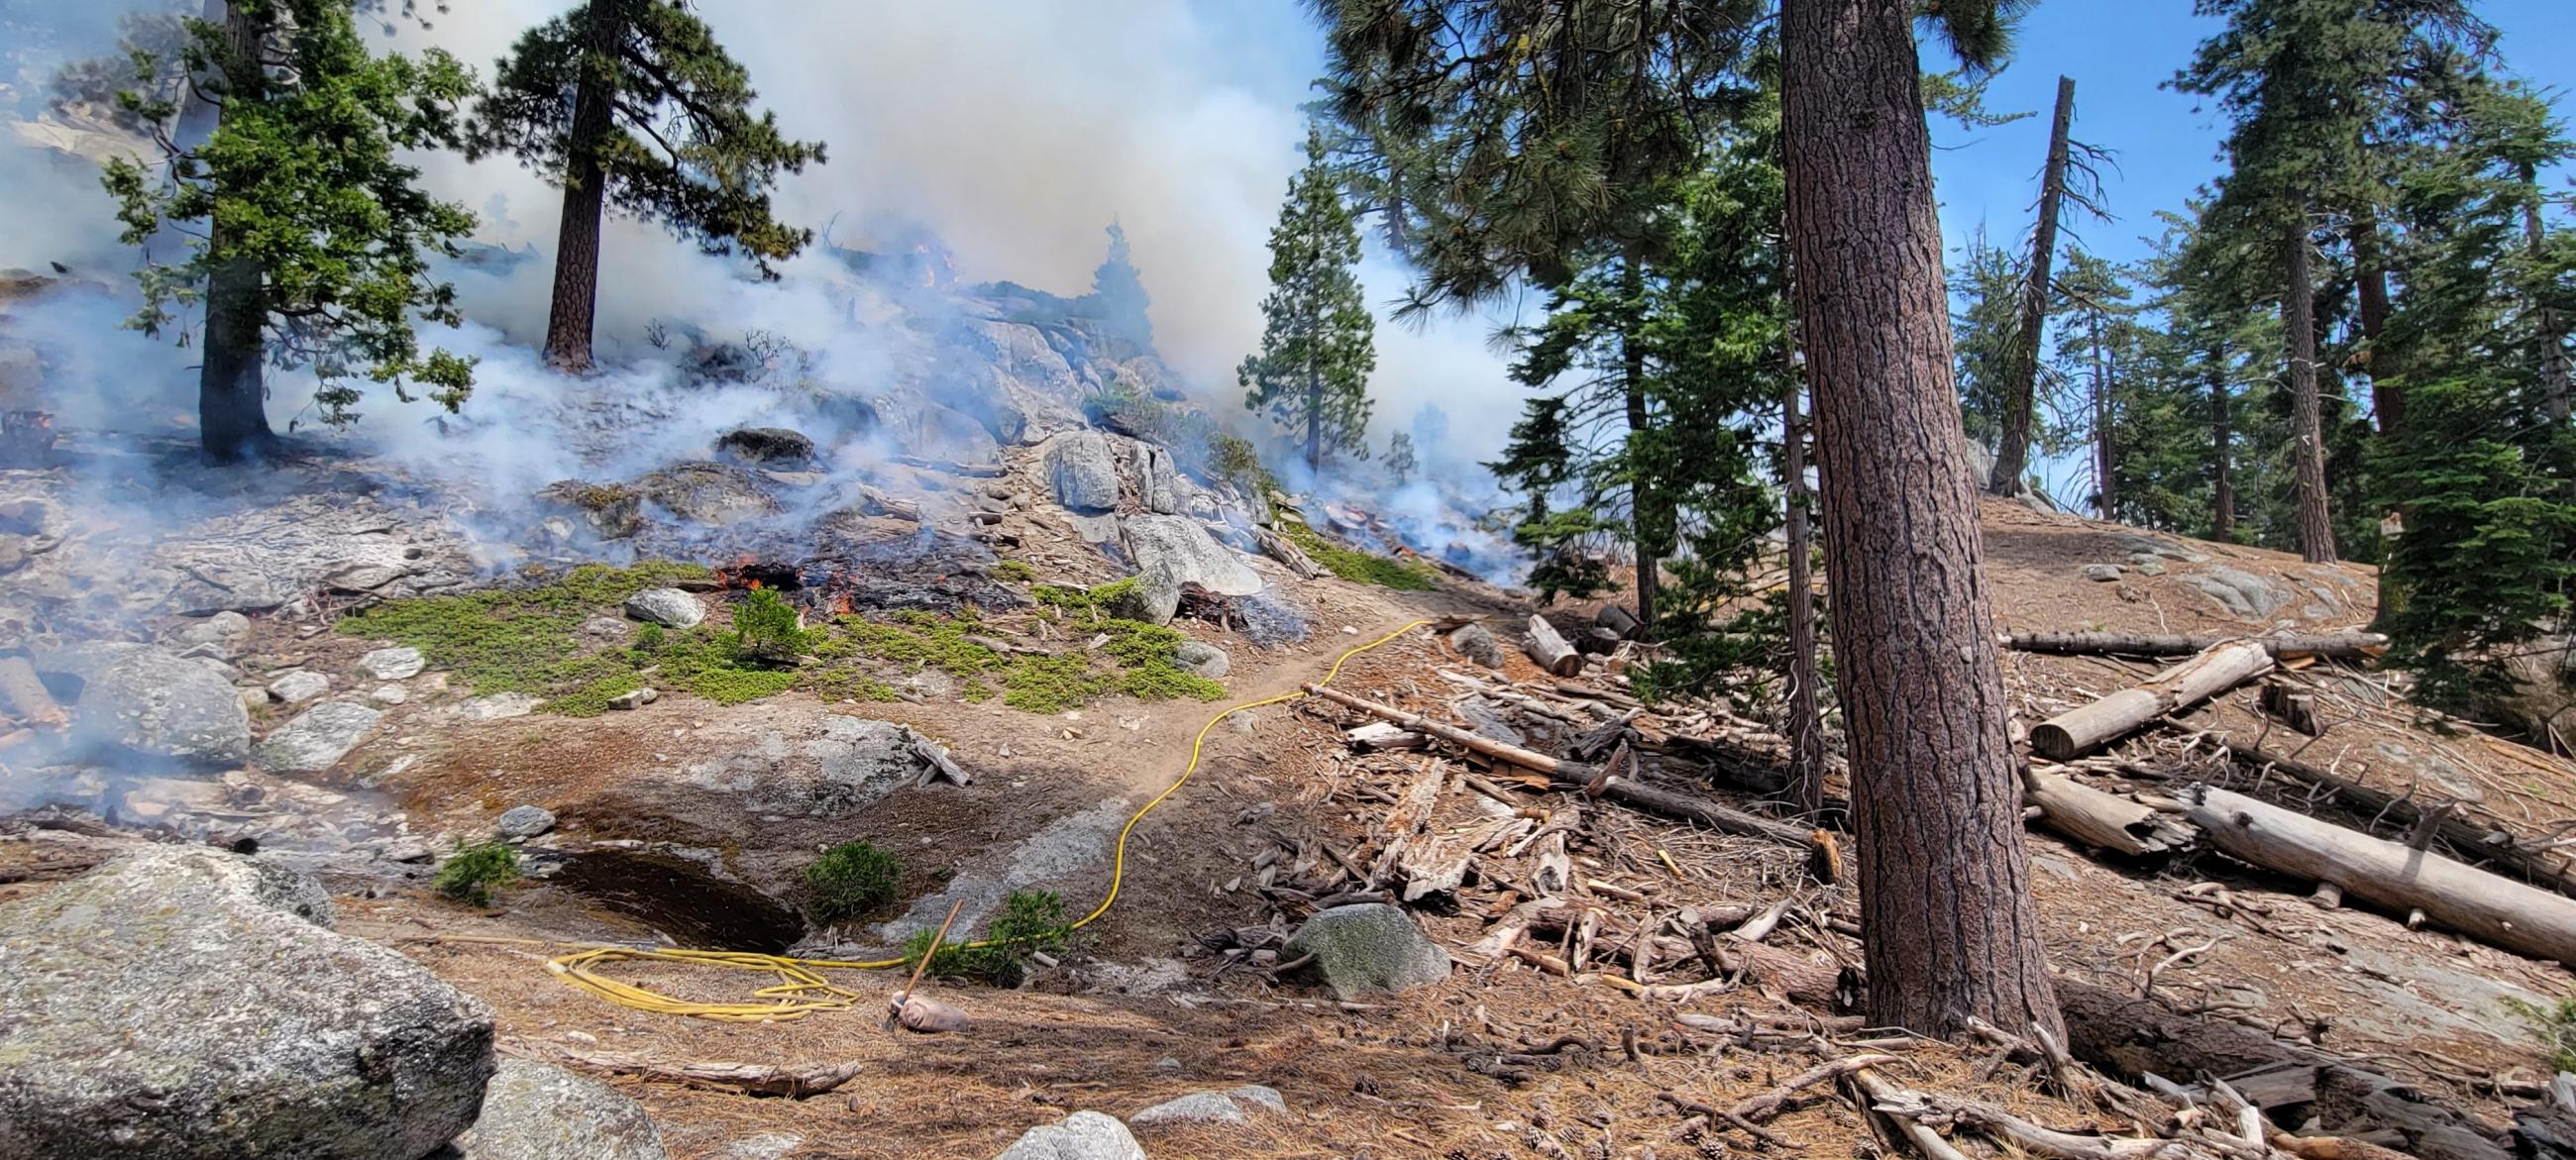 Photo of a forest with rocks, trees and dead and down fuels. The fuels are being consumed in the interior of the Park Ridge Prescribed fire.